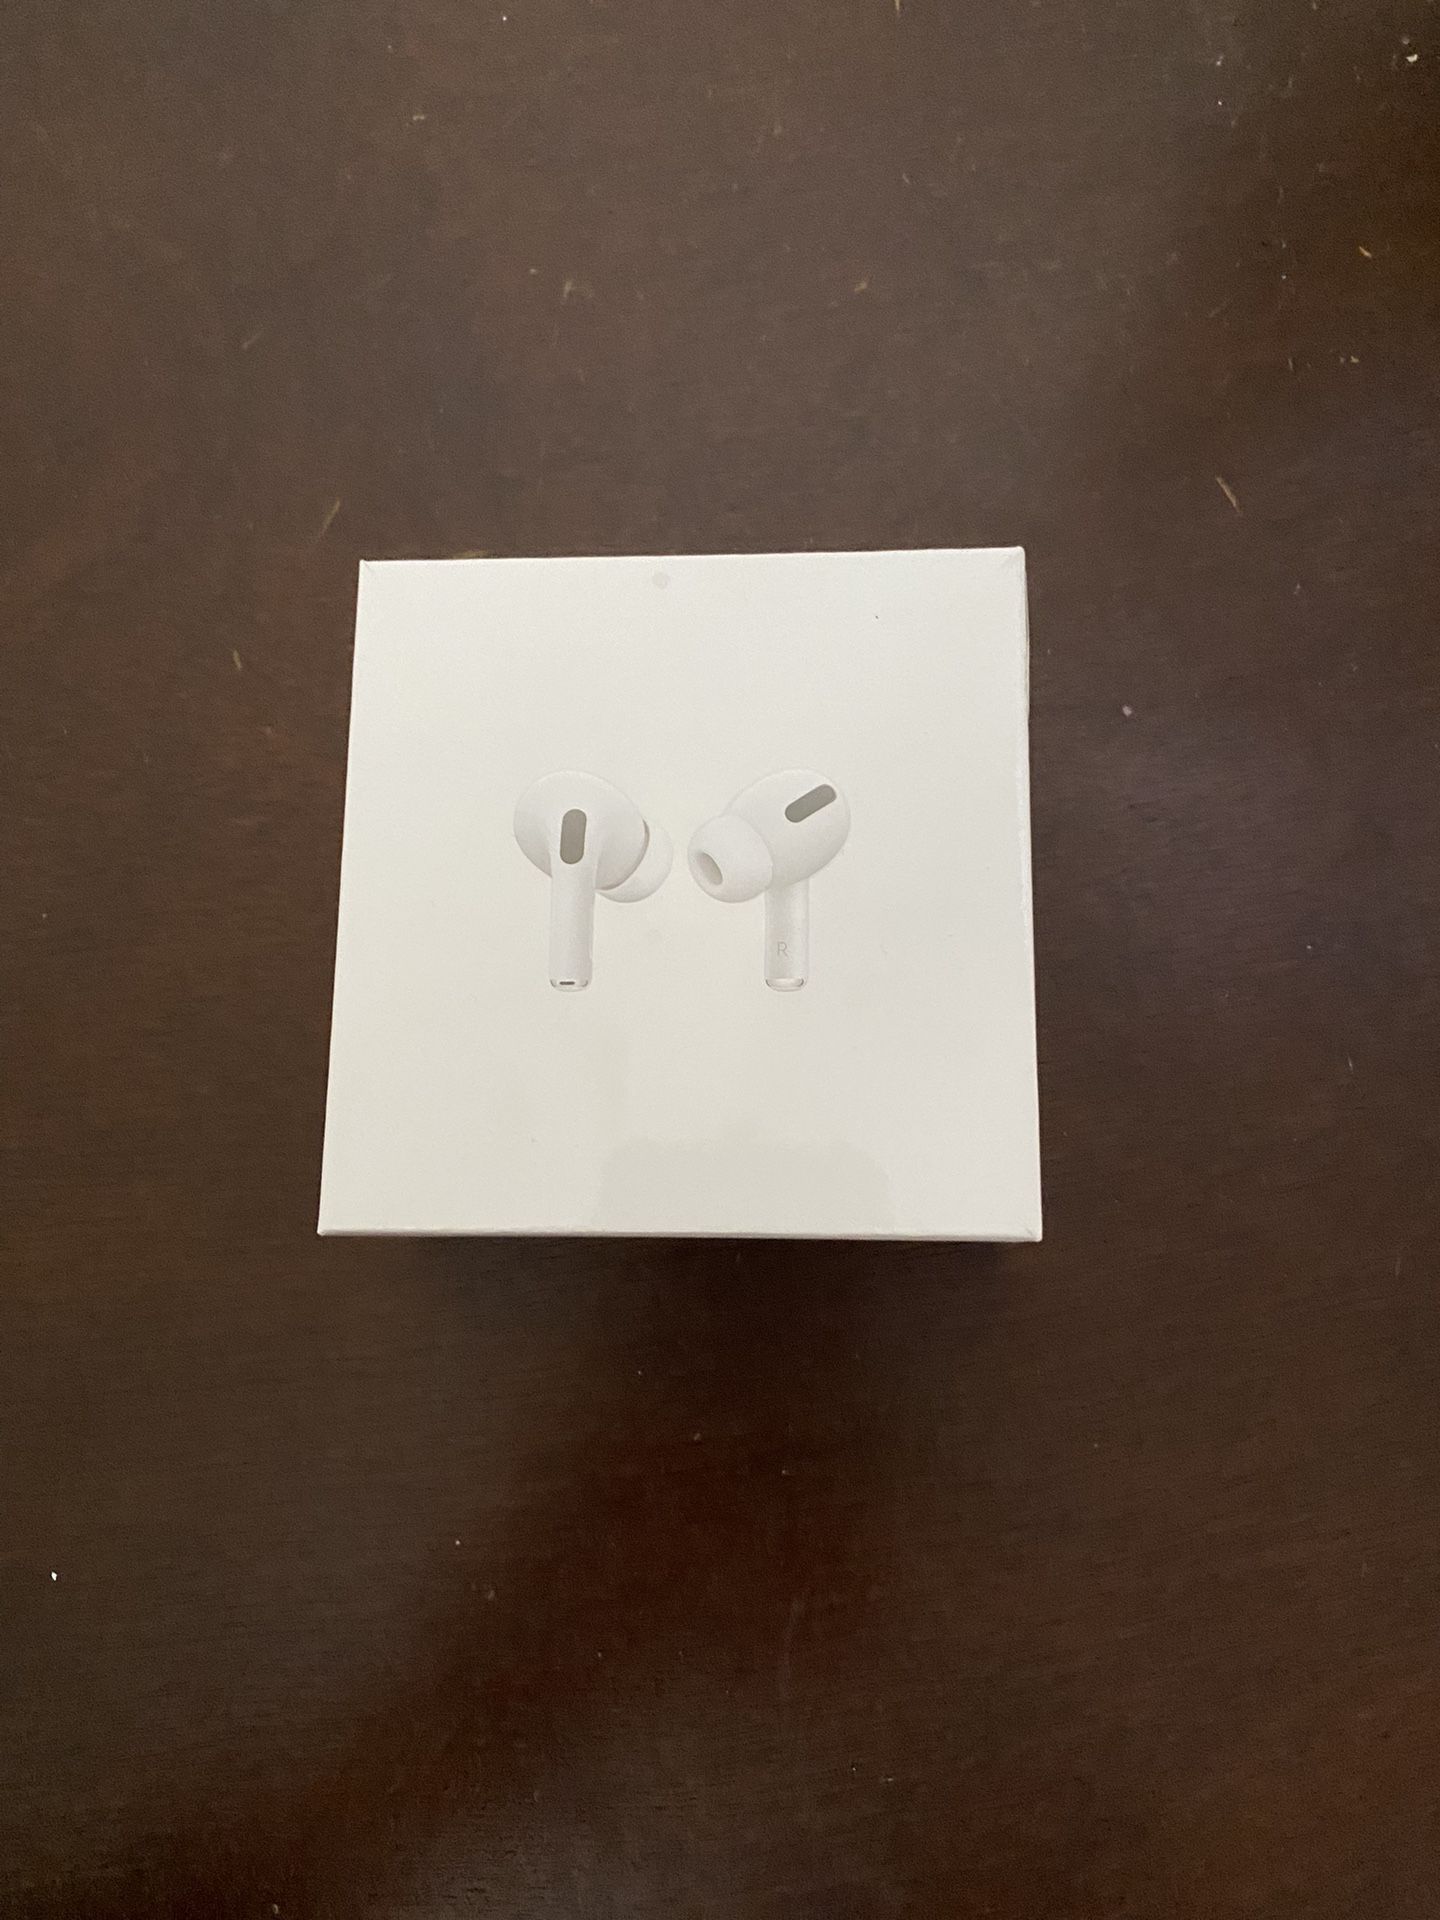 Airpod Pro Brand New Never opened 